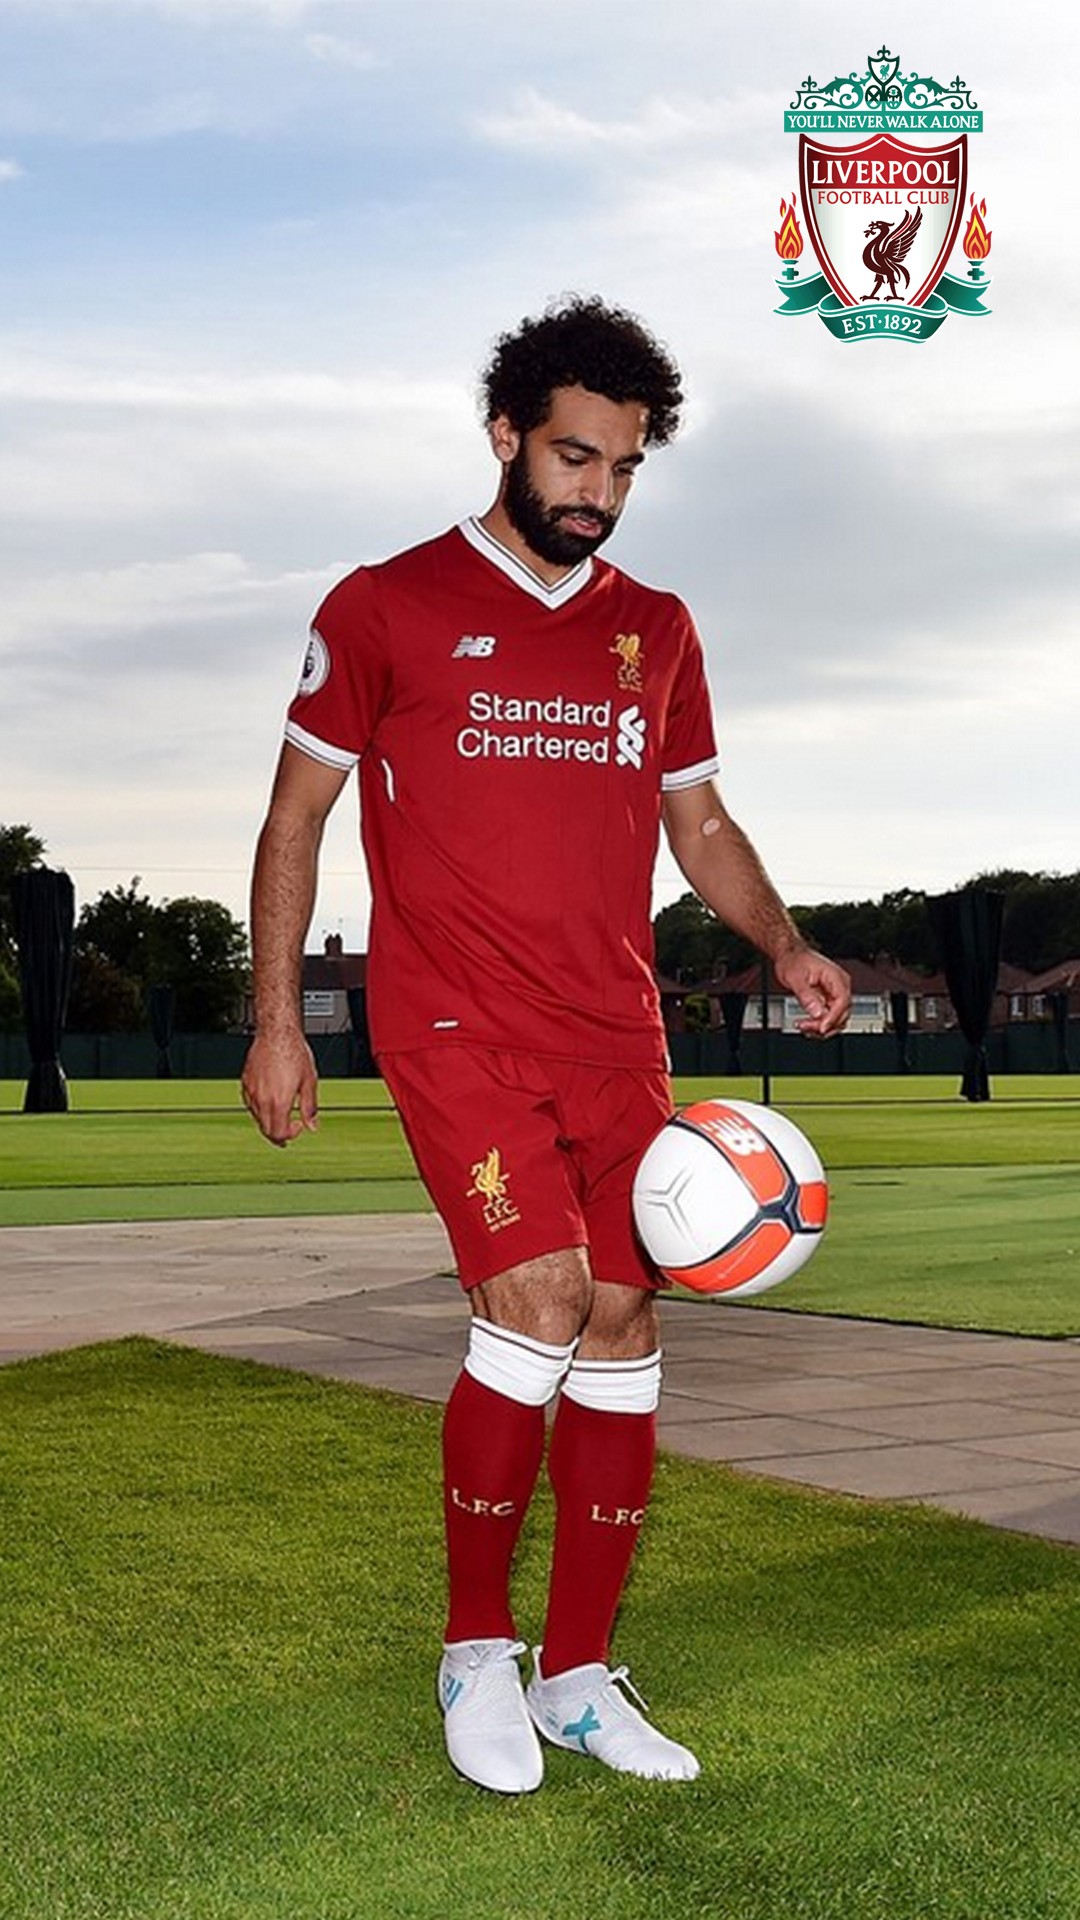 Wallpaper Android Mohamed Salah Pictures with image resolution 1080x1920 pixel. You can make this wallpaper for your Android backgrounds, Tablet, Smartphones Screensavers and Mobile Phone Lock Screen